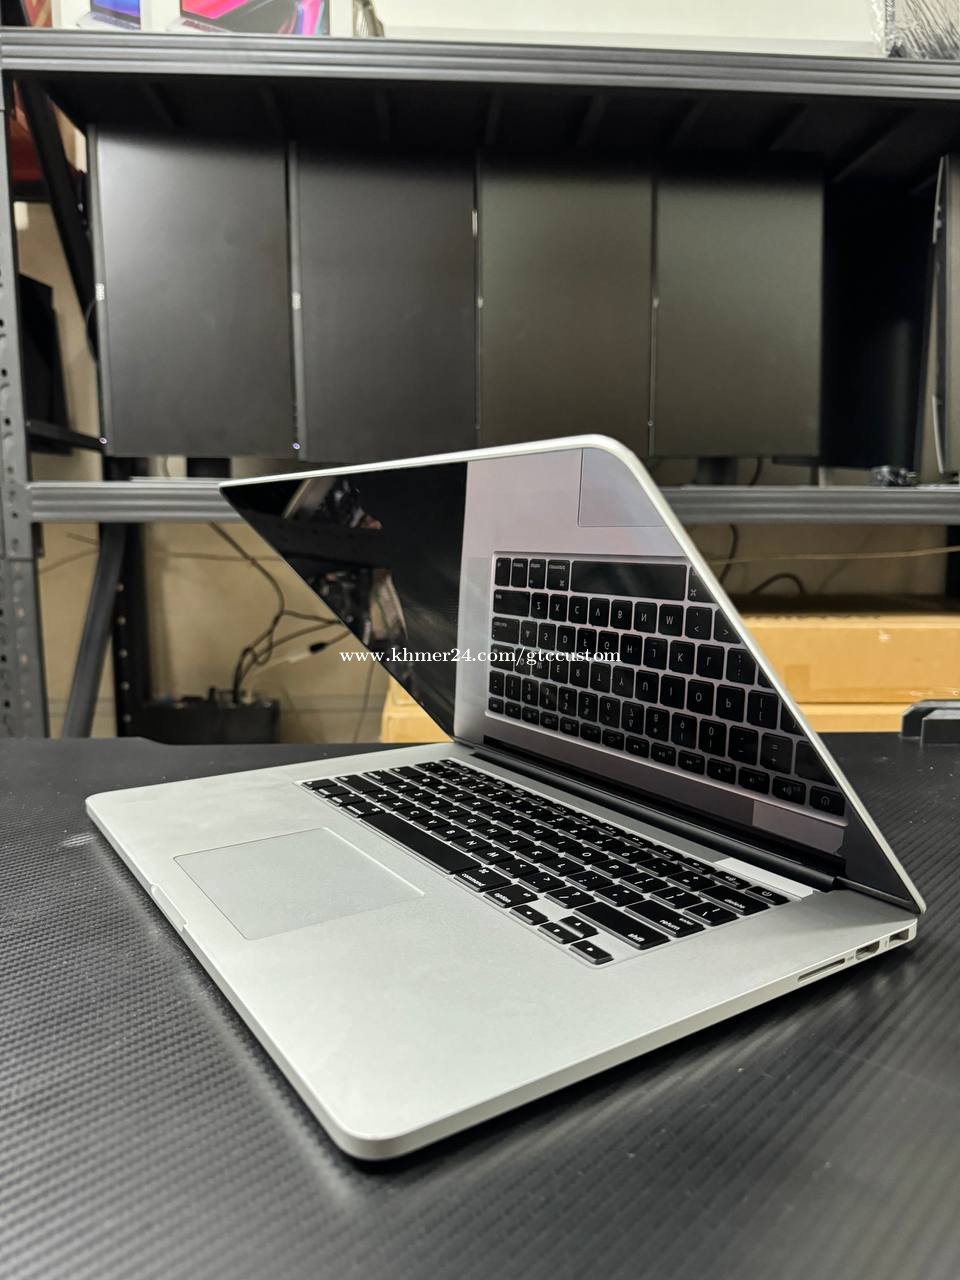 MacBook Pro 2015 silver Price $600.00 in Veal Vong, Cambodia - GTC